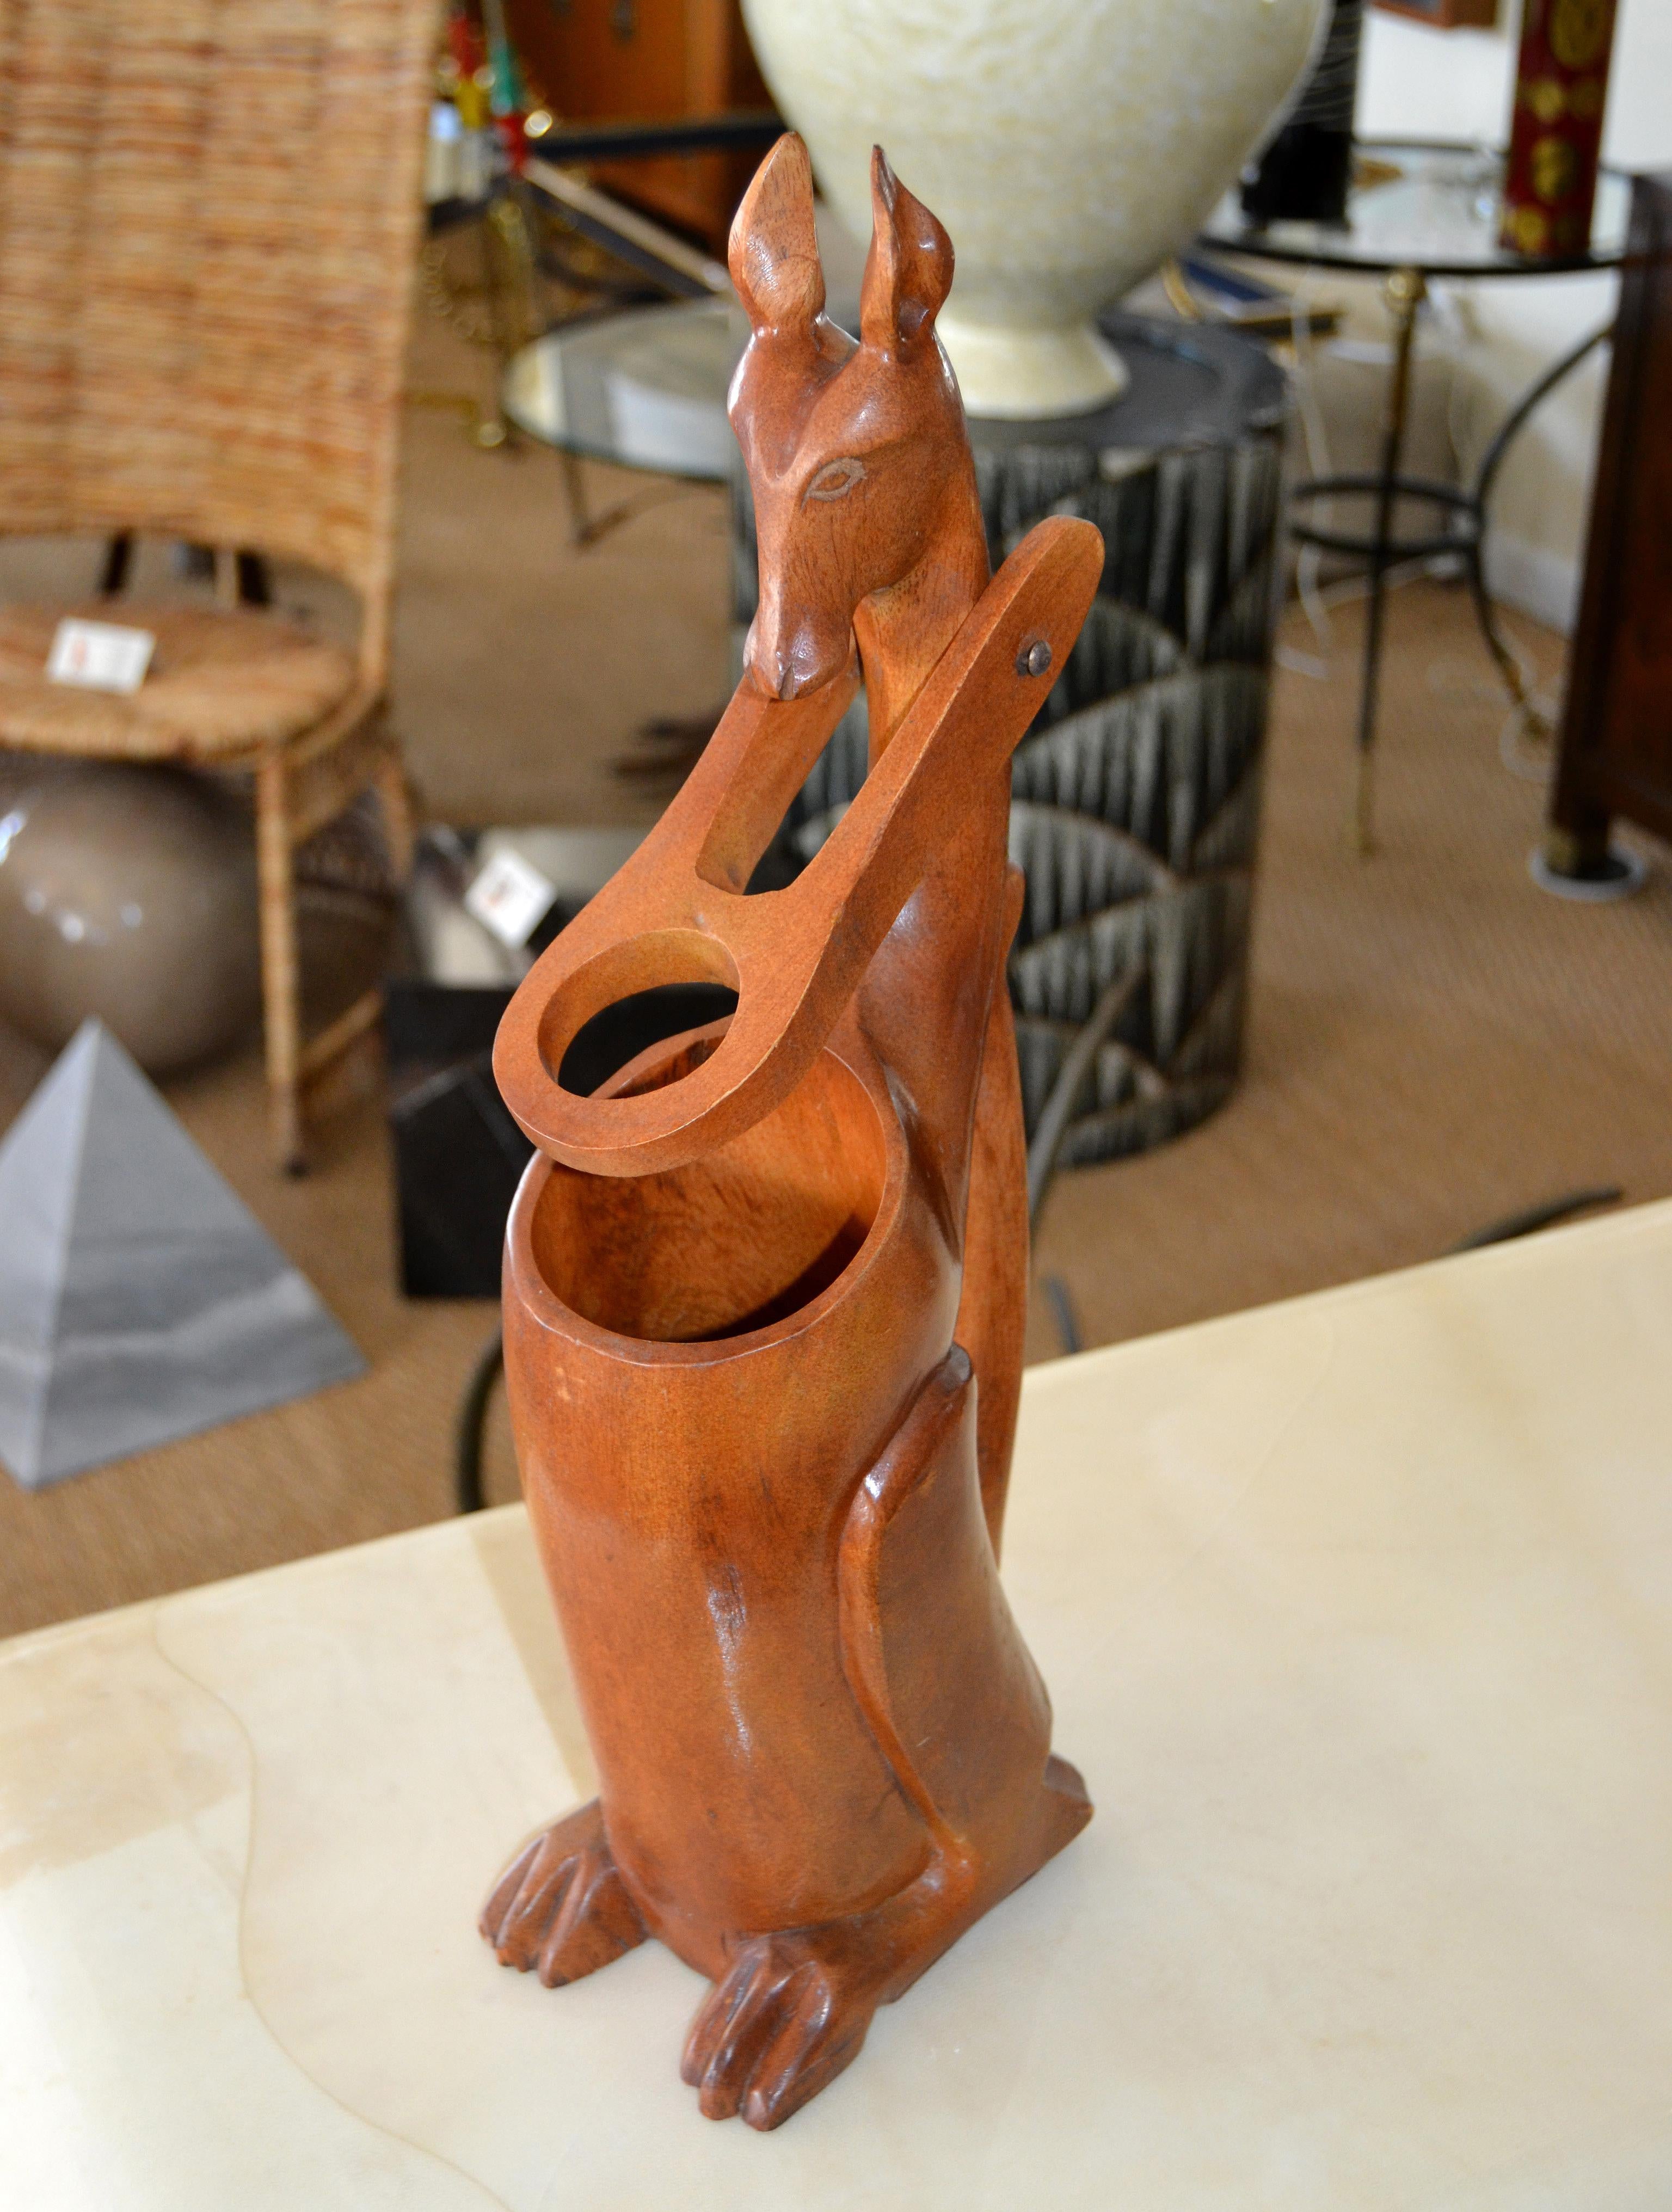 We offer a 1950s hand carved wooden kangaroo wine bottle holder, pourer or dispenser.
Made out of one piece of wood with lovely details.
Good vintage condition with some chips to the base, shown in the pictures.  